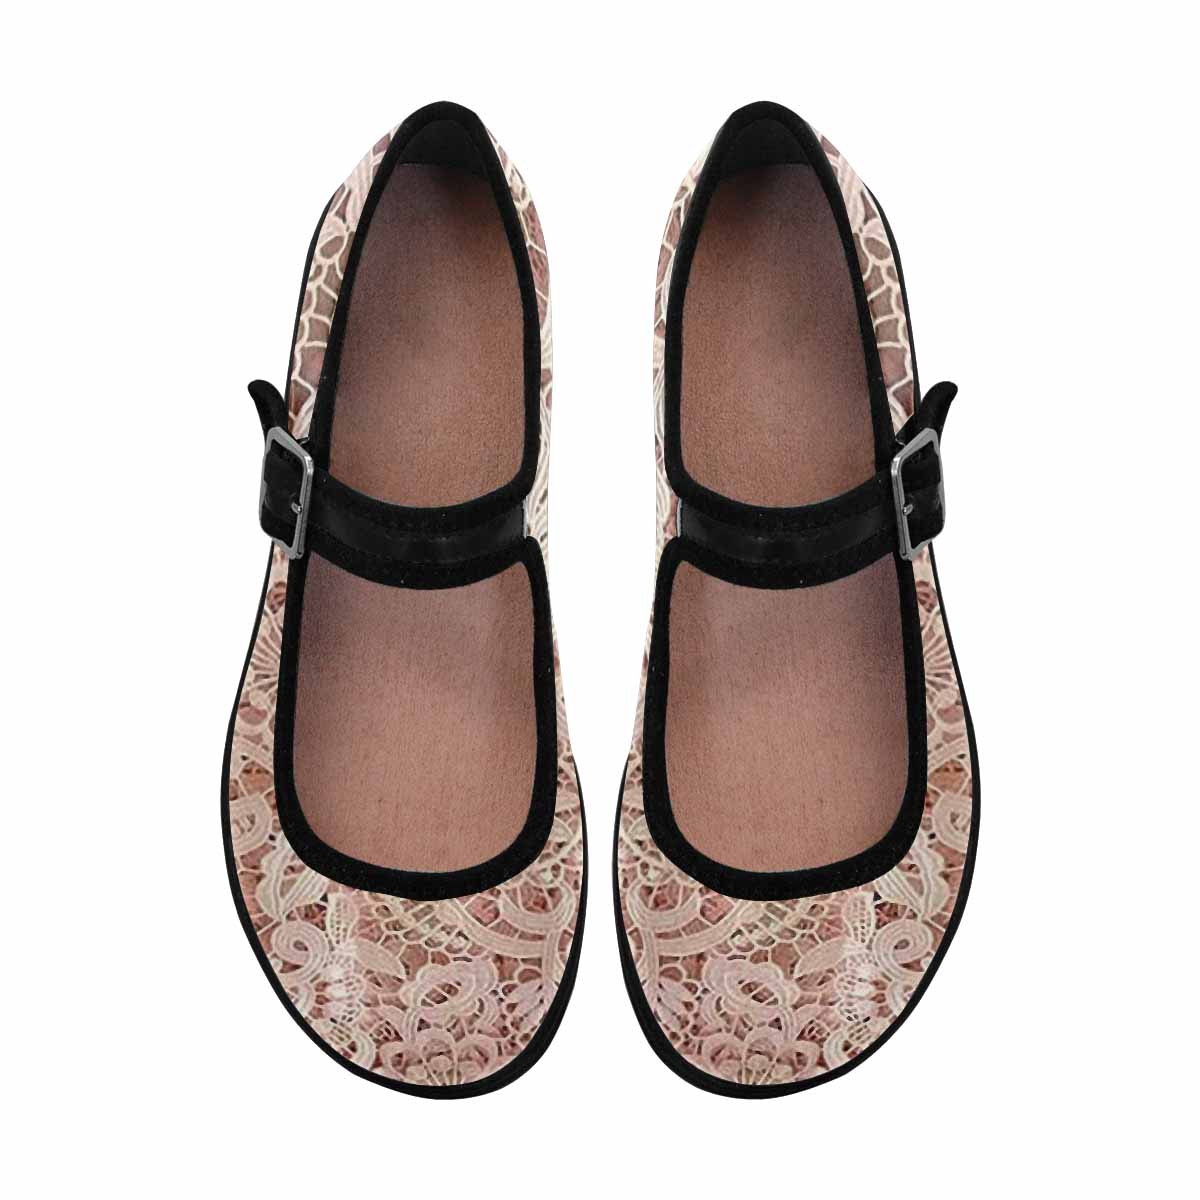 Victorian lace print, cute, vintage style women's Mary Jane shoes, design 11